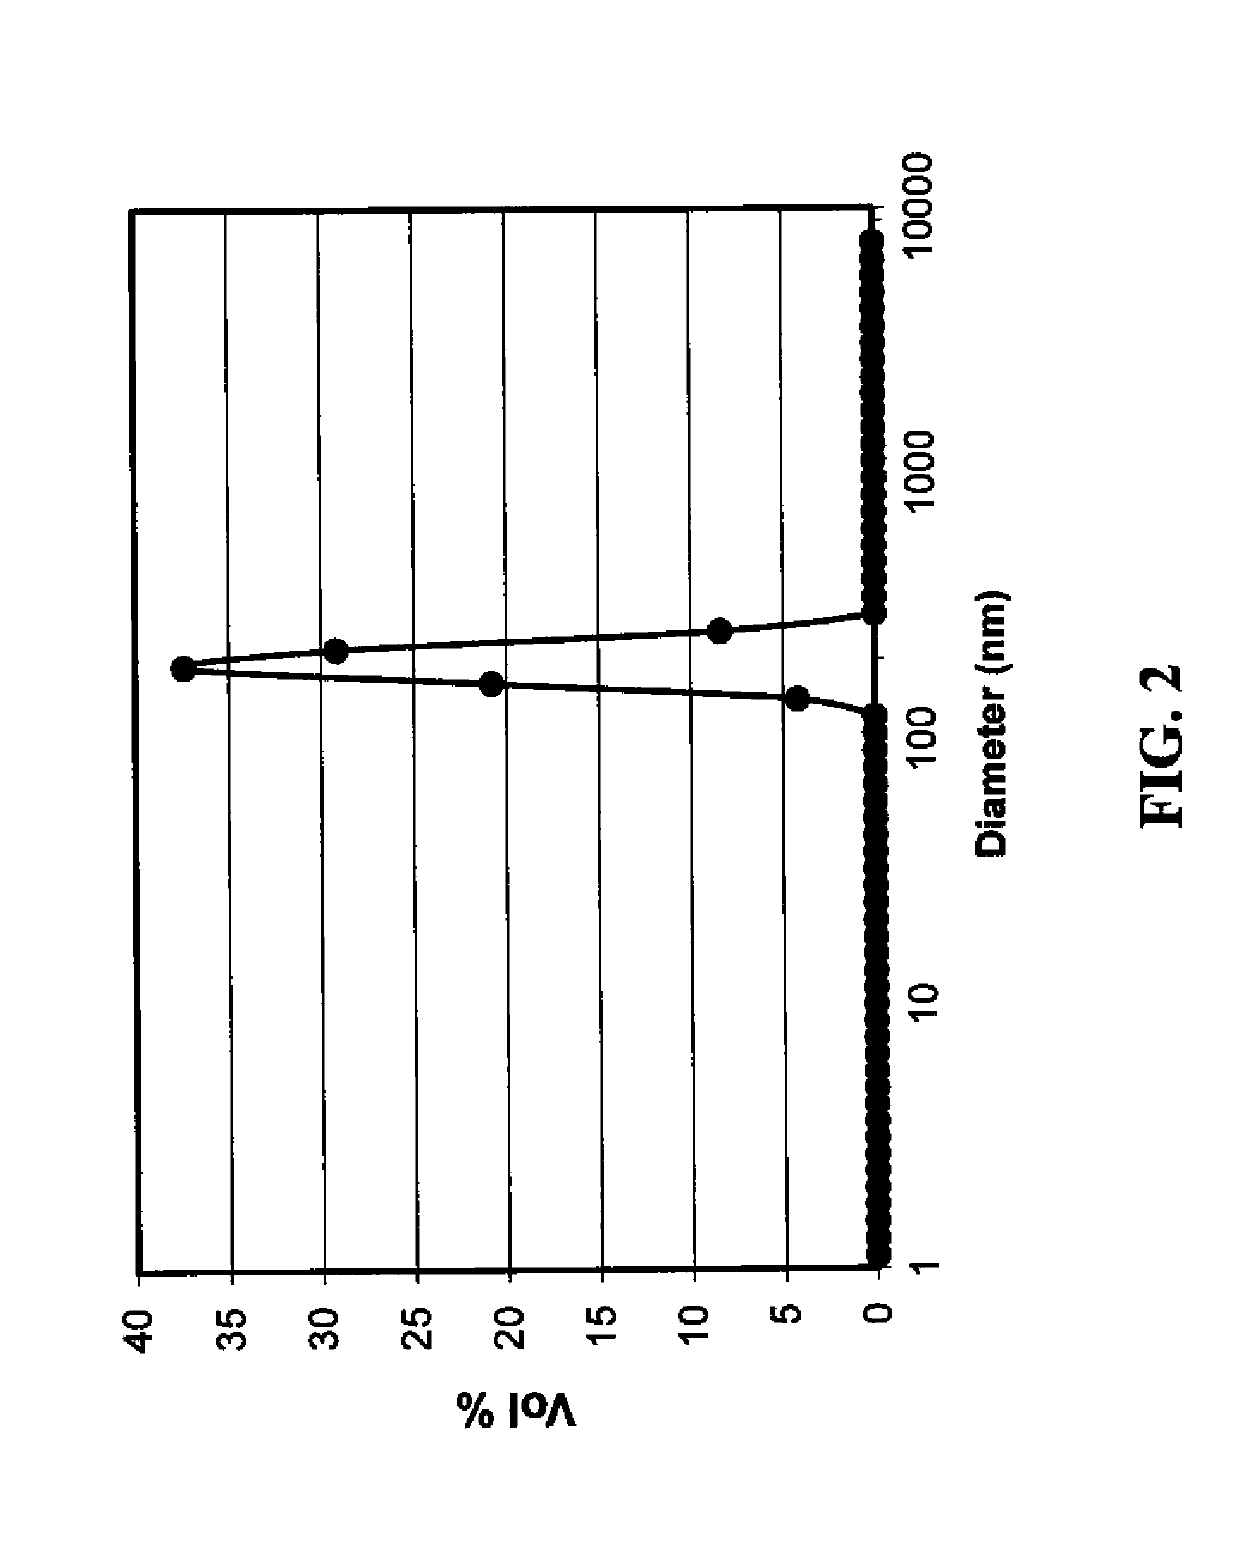 Method of making silver-containing dispersions with nitrogenous bases